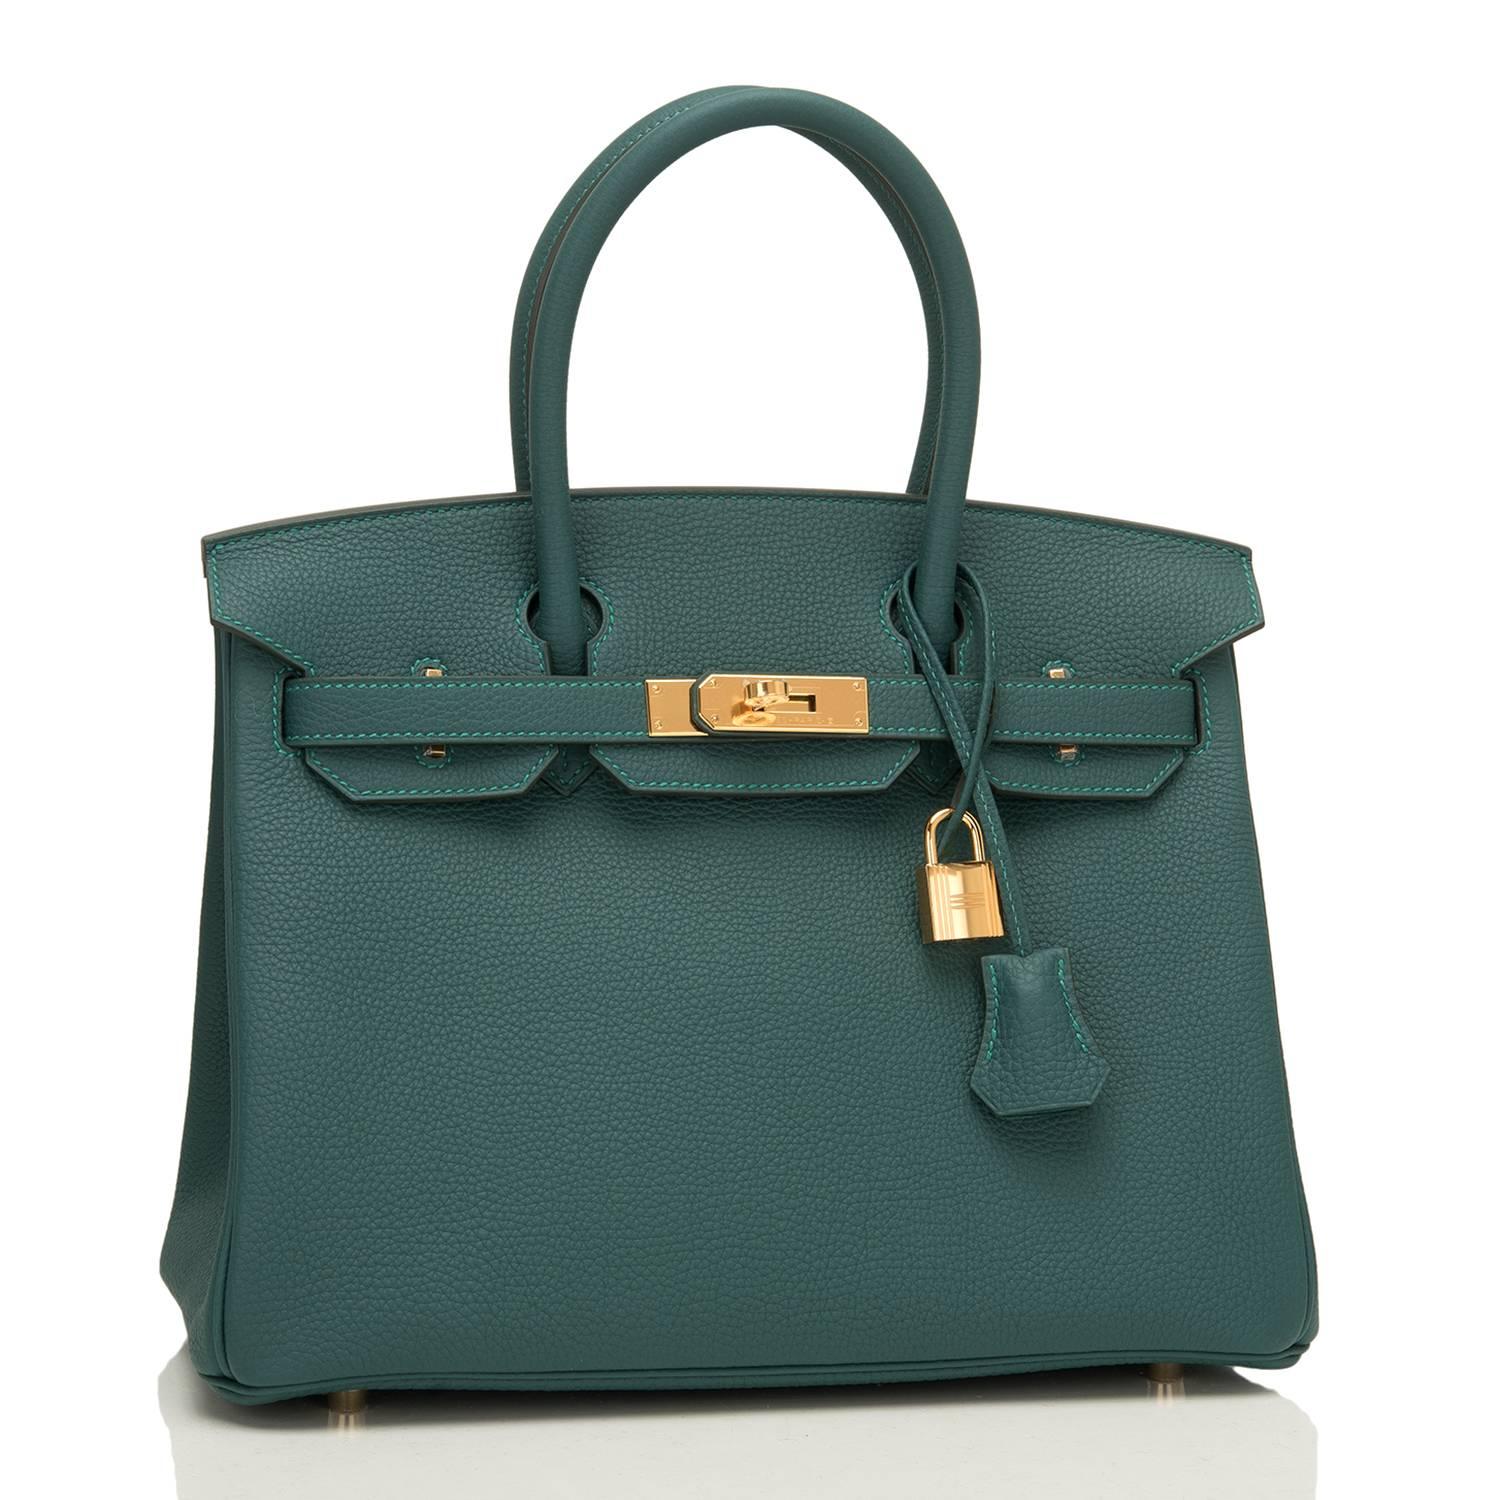 Hermes Malachite Birkin 30cm of togo leather with gold hardware.

This Birkin has tonal stitching, a front toggle closure, a clochette with lock and two keys, and double rolled handles.

The interior is lined with Malachite chevre and has one zip